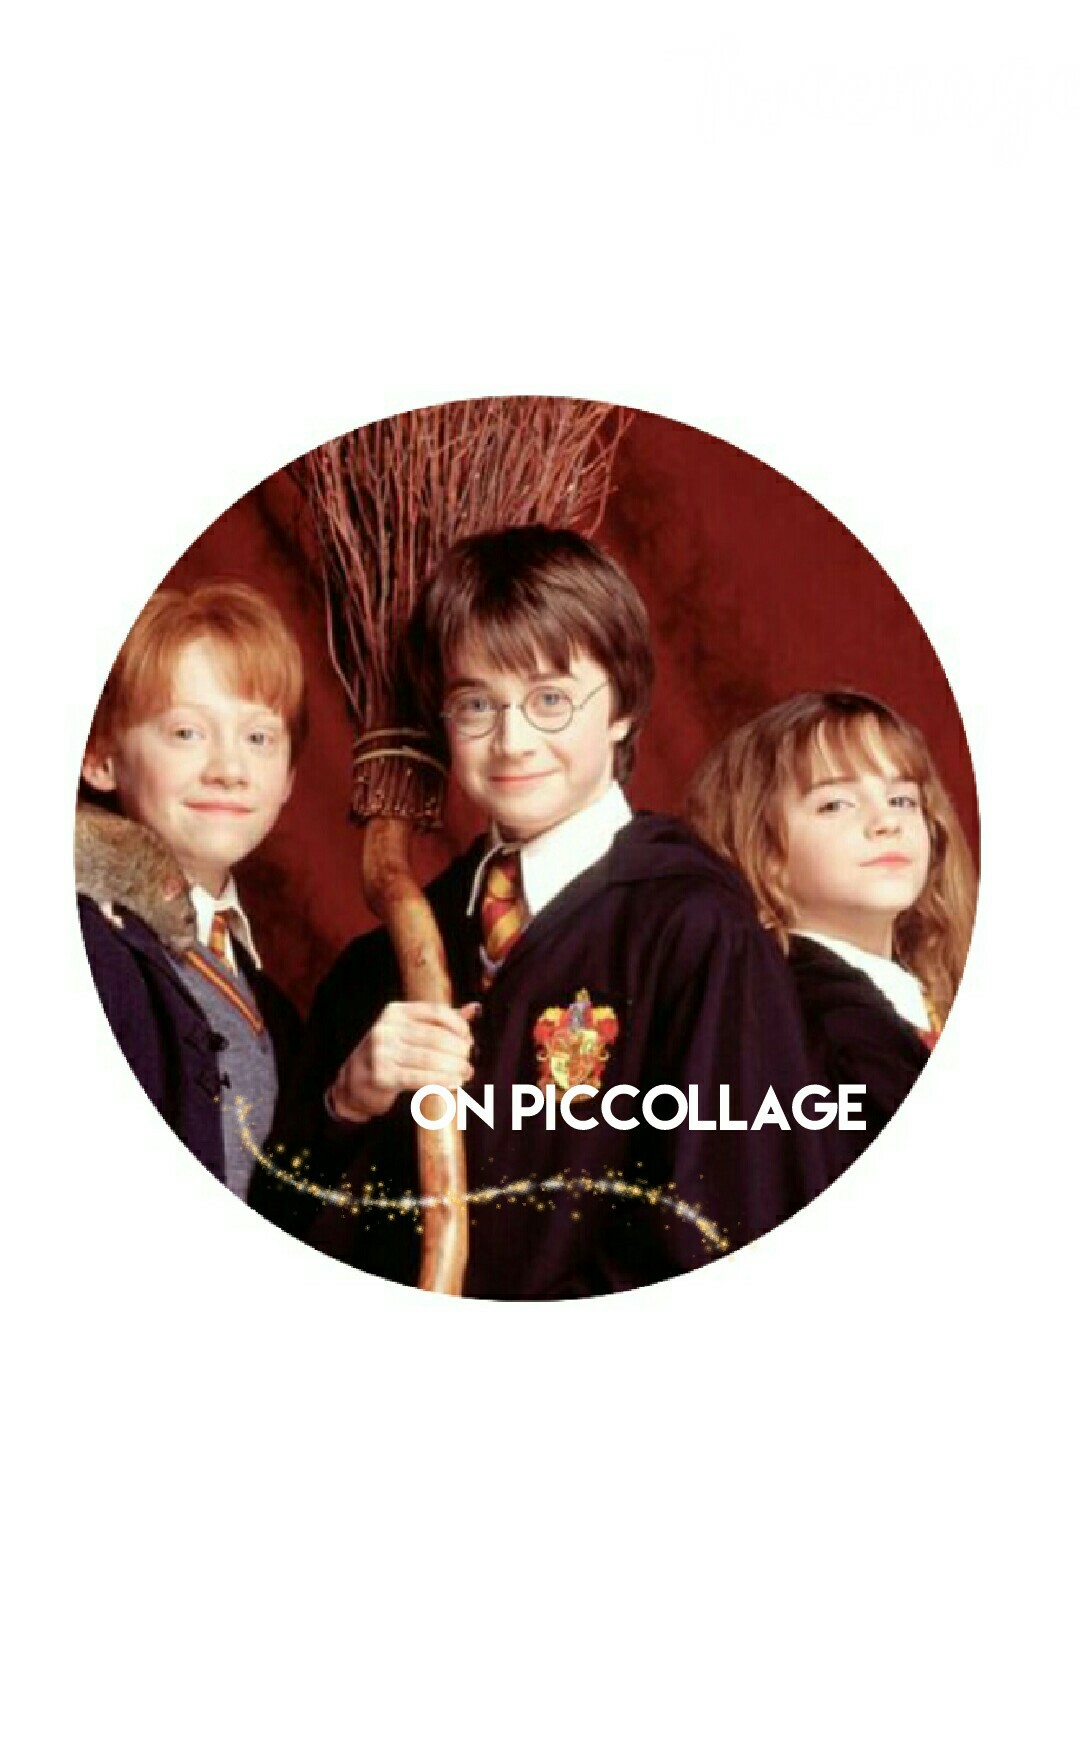 We get a lot of requests for Harry Potter icons so you can just remix this and put ur name on it or complete the icon form if you want a custom one!